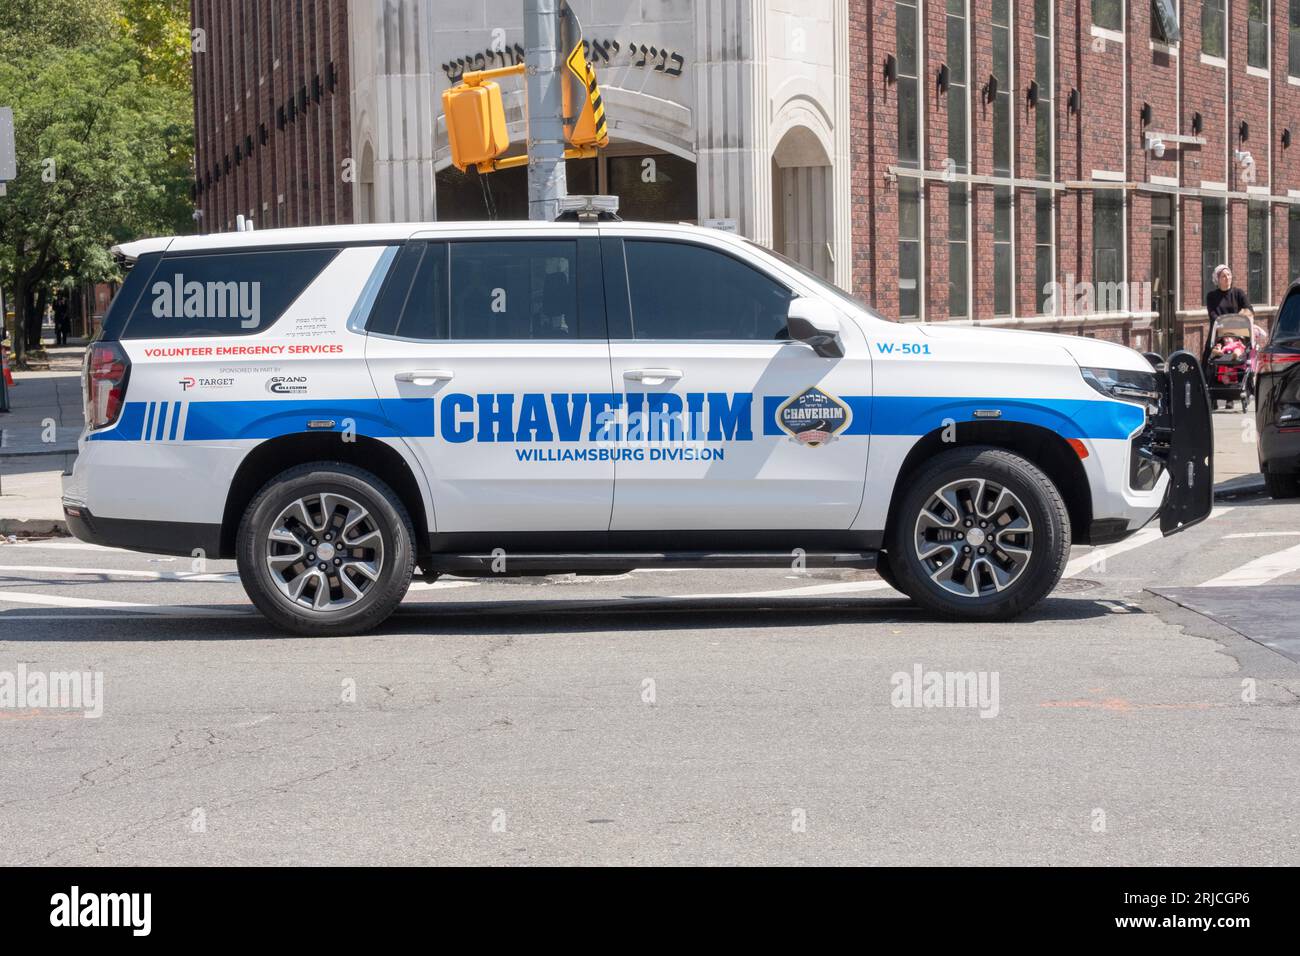 A Chaveirim (Hebrew for friends) vehicle that helps neighbors in need like lockouts, flats, battery boosts, etc. In Brooklyn. Stock Photo